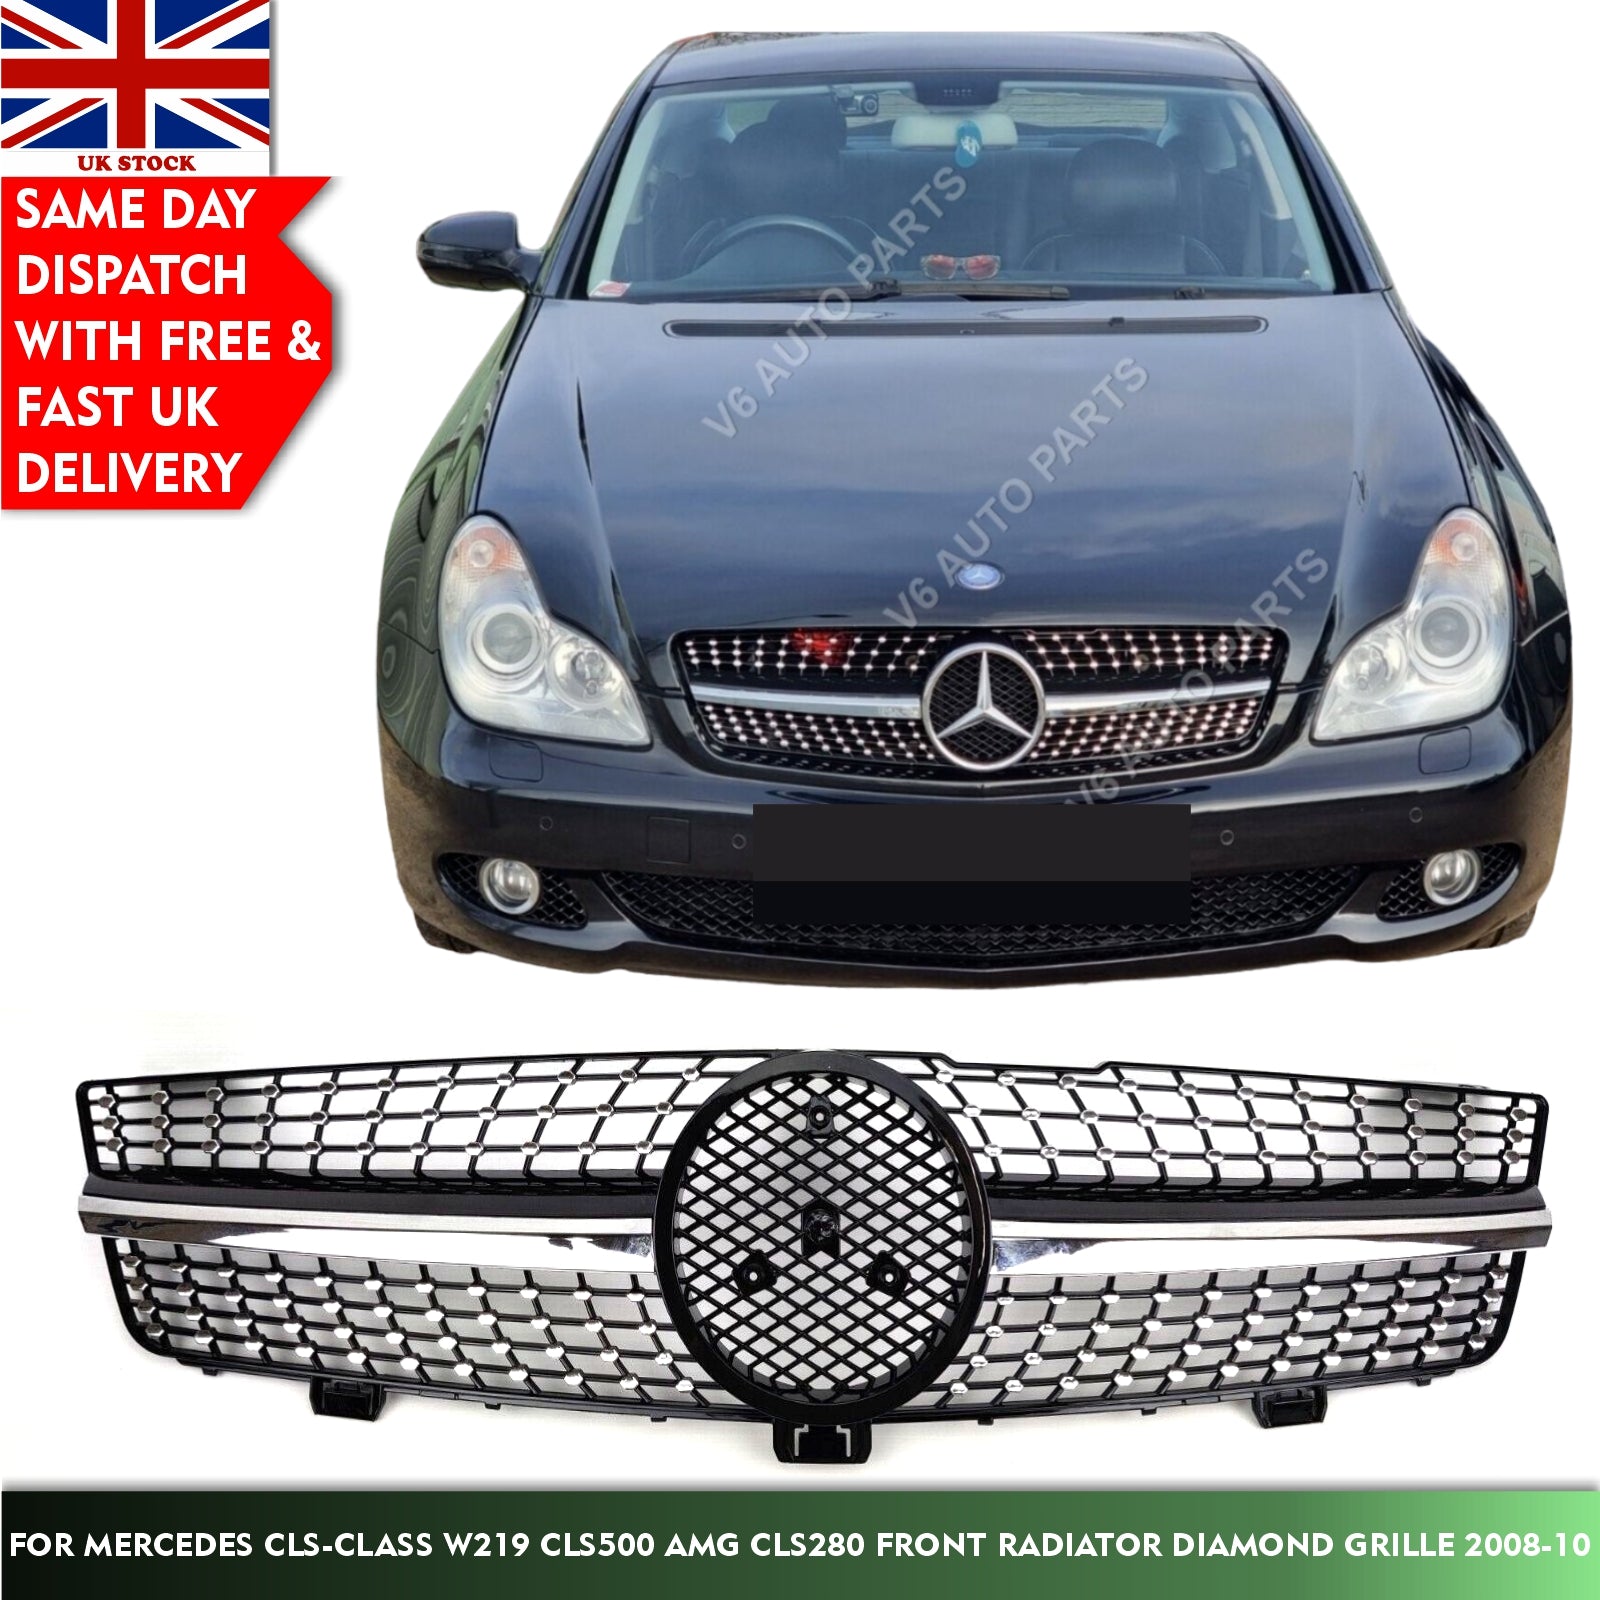 For Mercedes CLS-Class W219 CLS500 AMG CLS280 Front Radiator Diamond Grille 2008-10